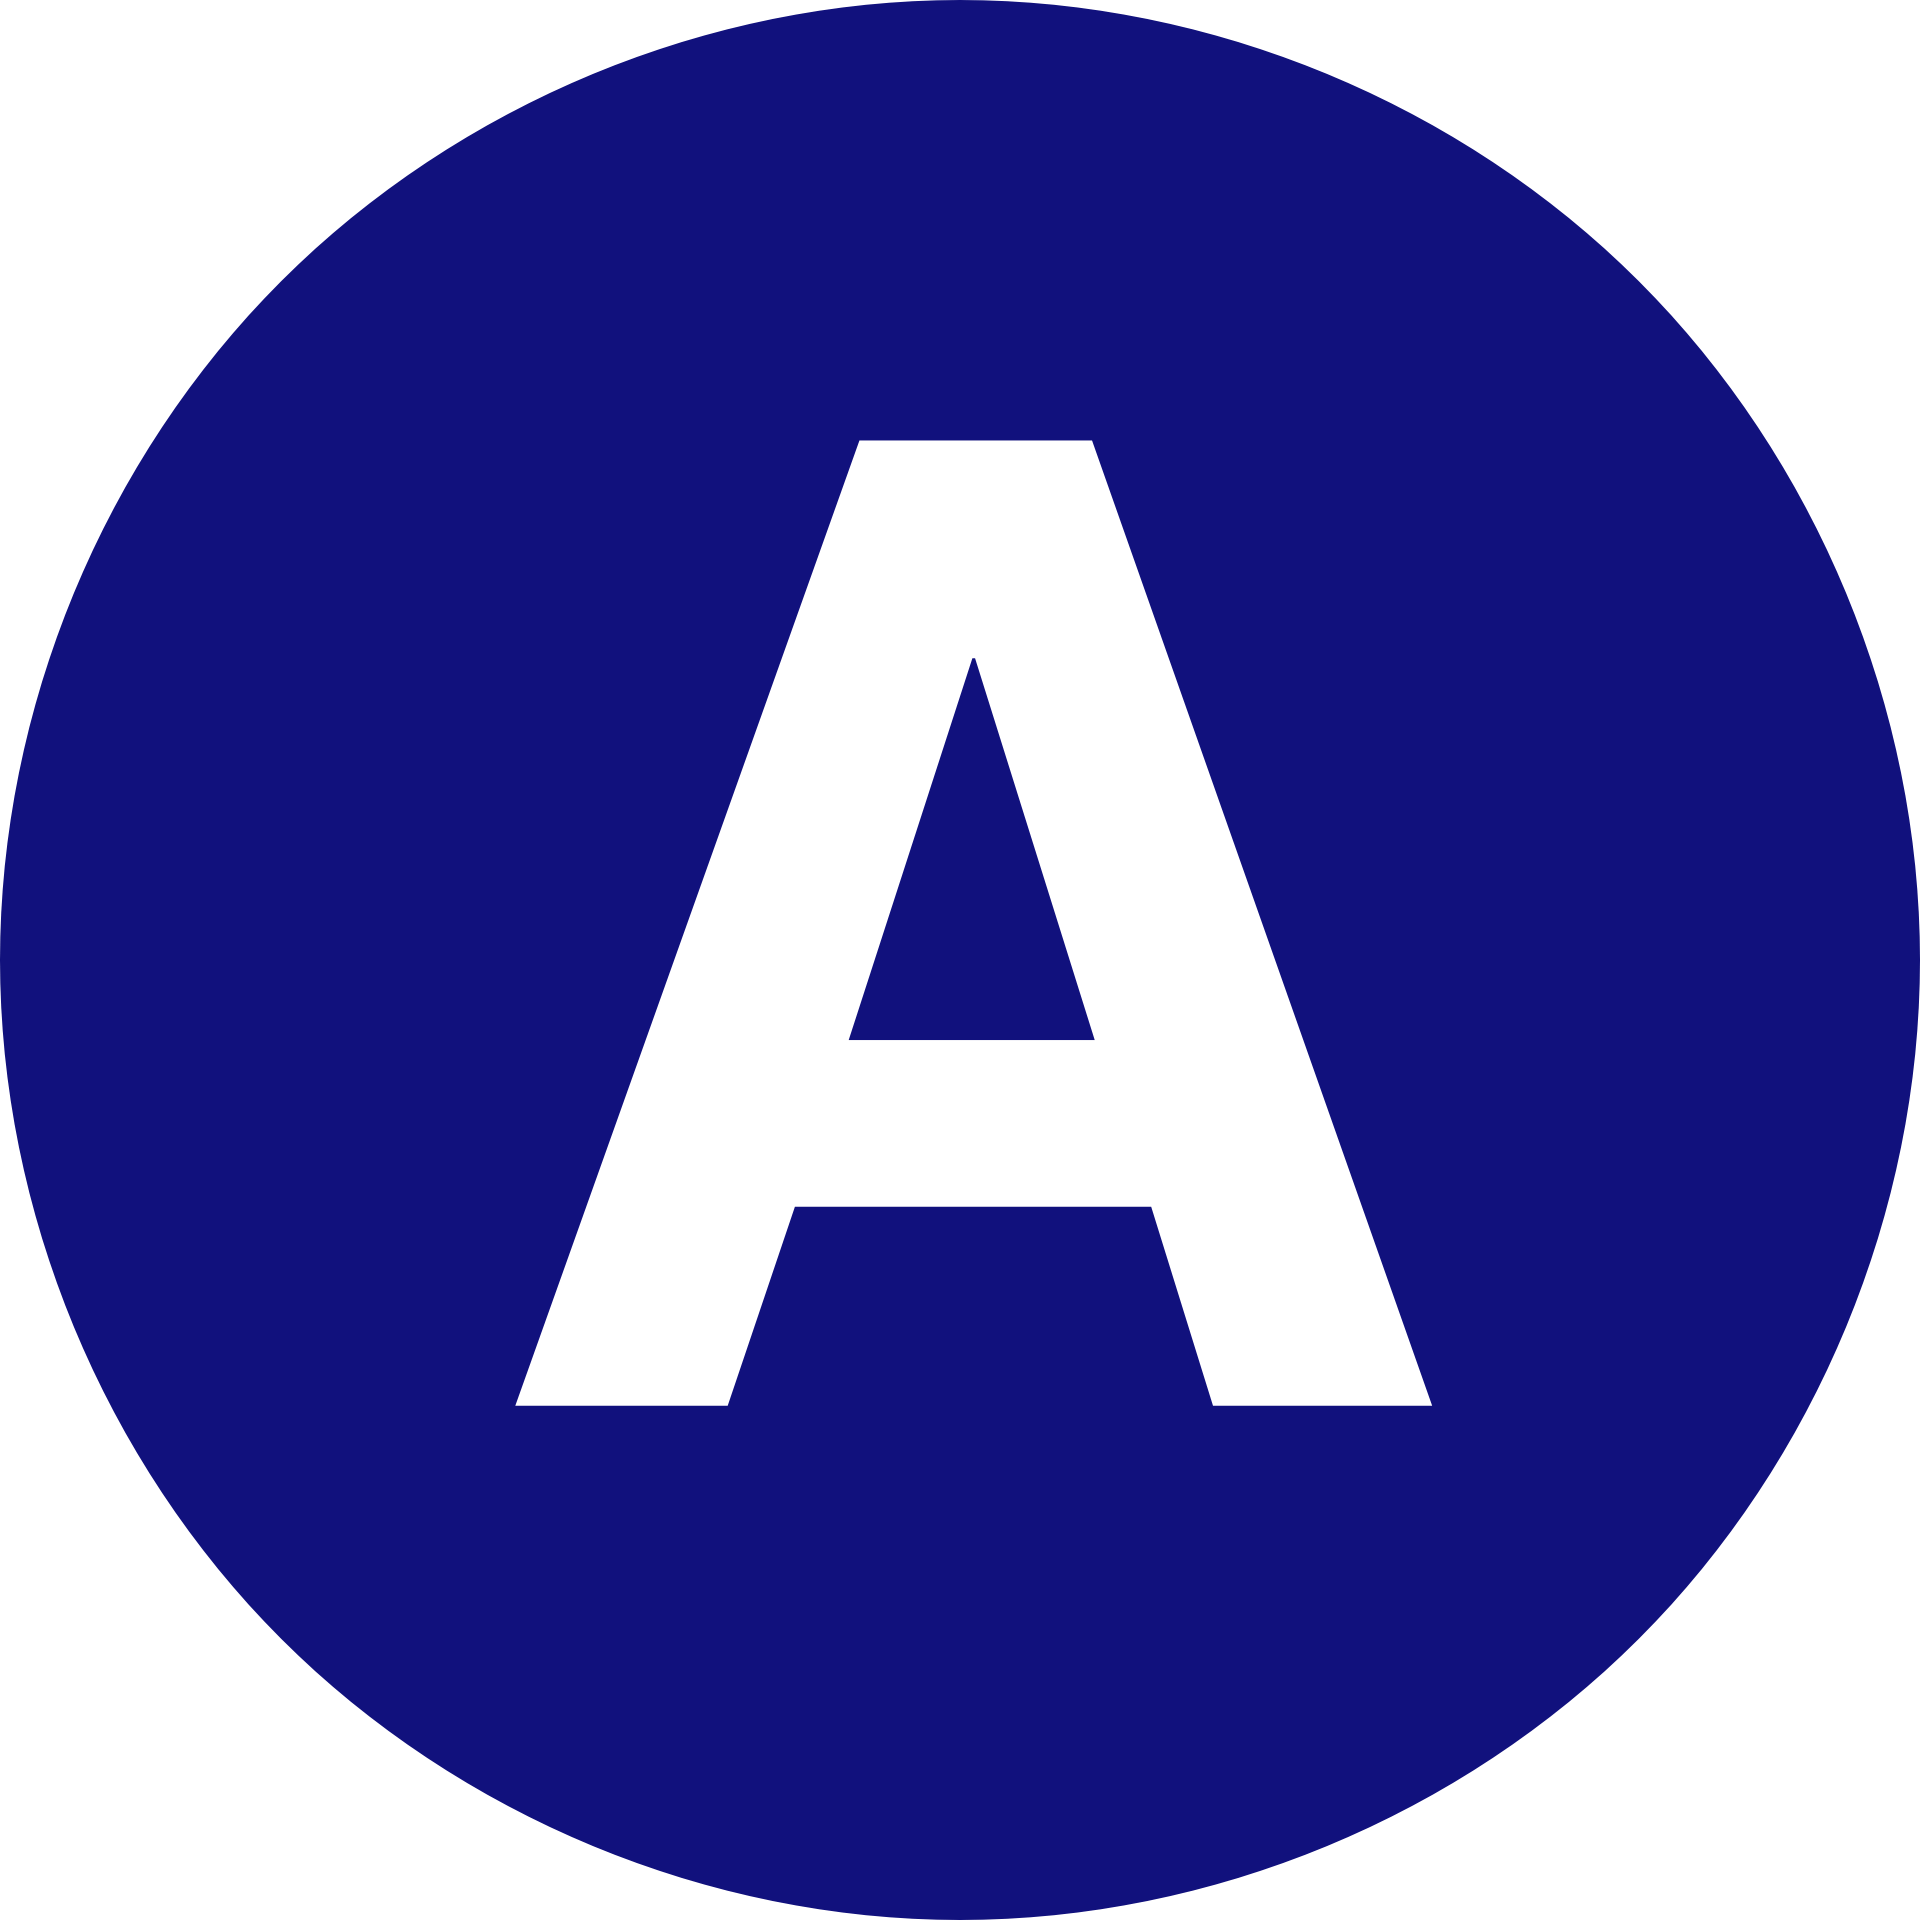 Blue in Circle Logo - letter a in a circle.fullring.co